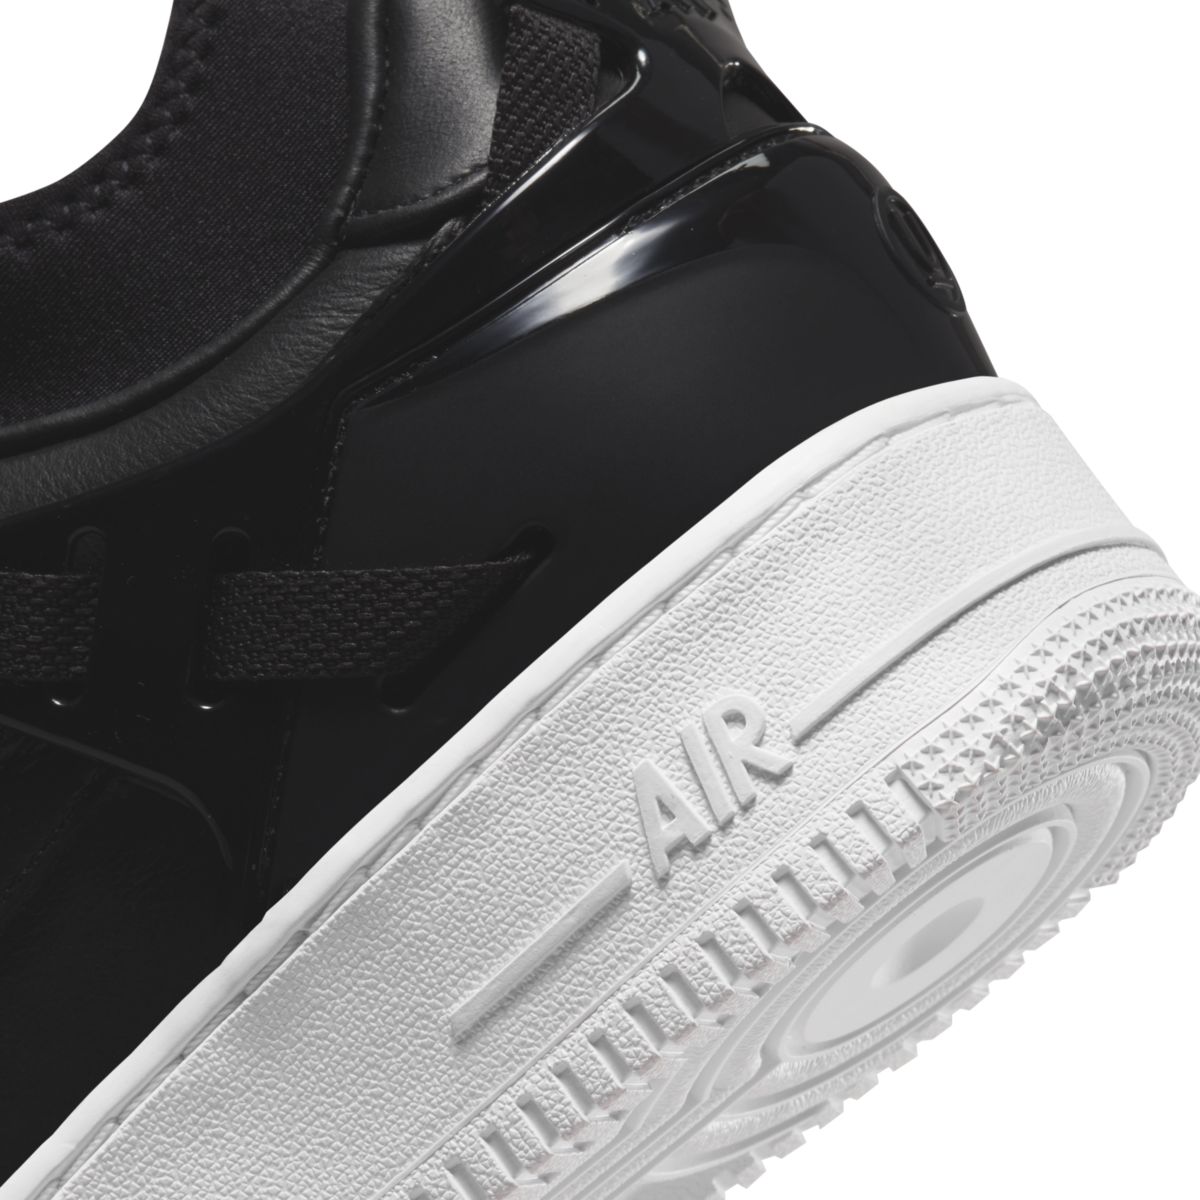 Undercover x Nike Air Force 1 Low Black DQ7558-002 7